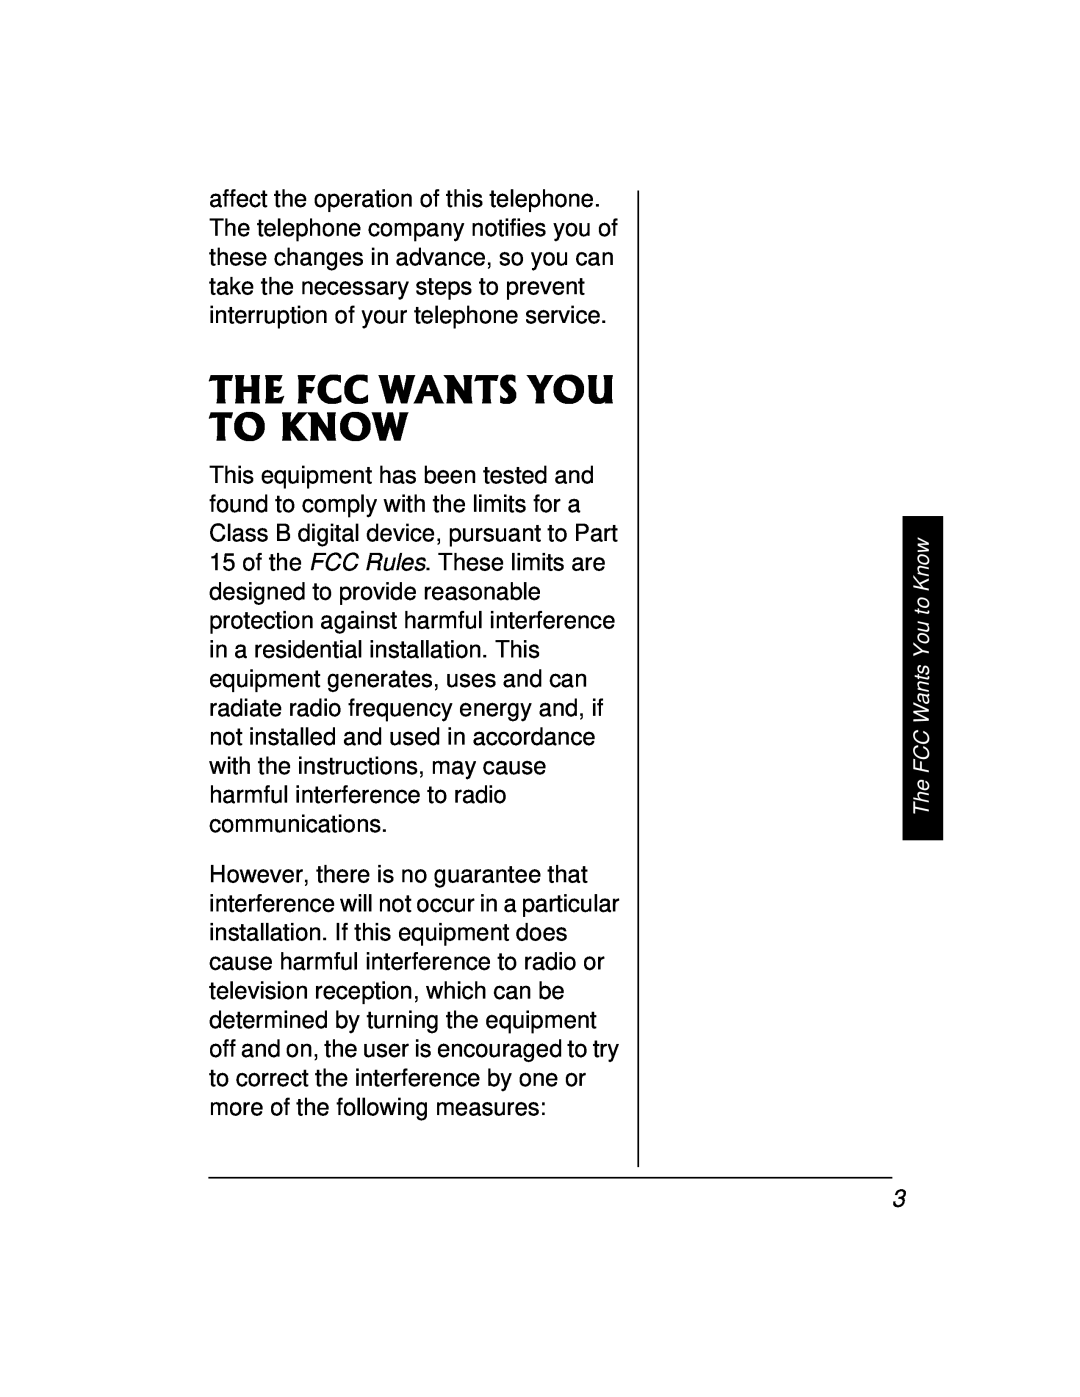 Radio Shack 43-3888 owner manual The Fcc Wants You To Know, The FCC Wants You to Know 